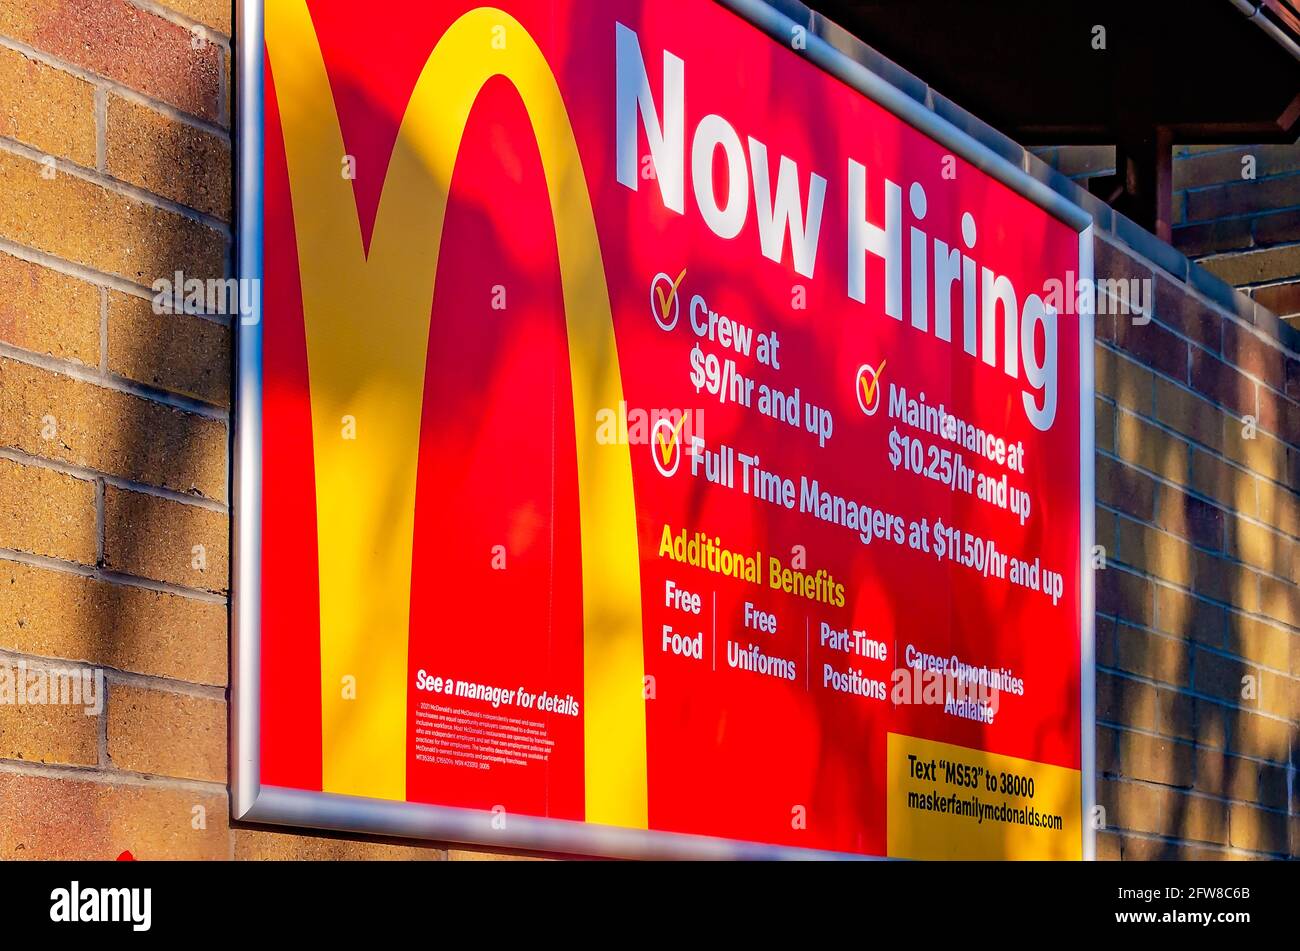 A “now hiring” sign lists benefits of the job at McDonald’s on Highway 90, May 8, 2021, in Biloxi, Mississippi. Stock Photo